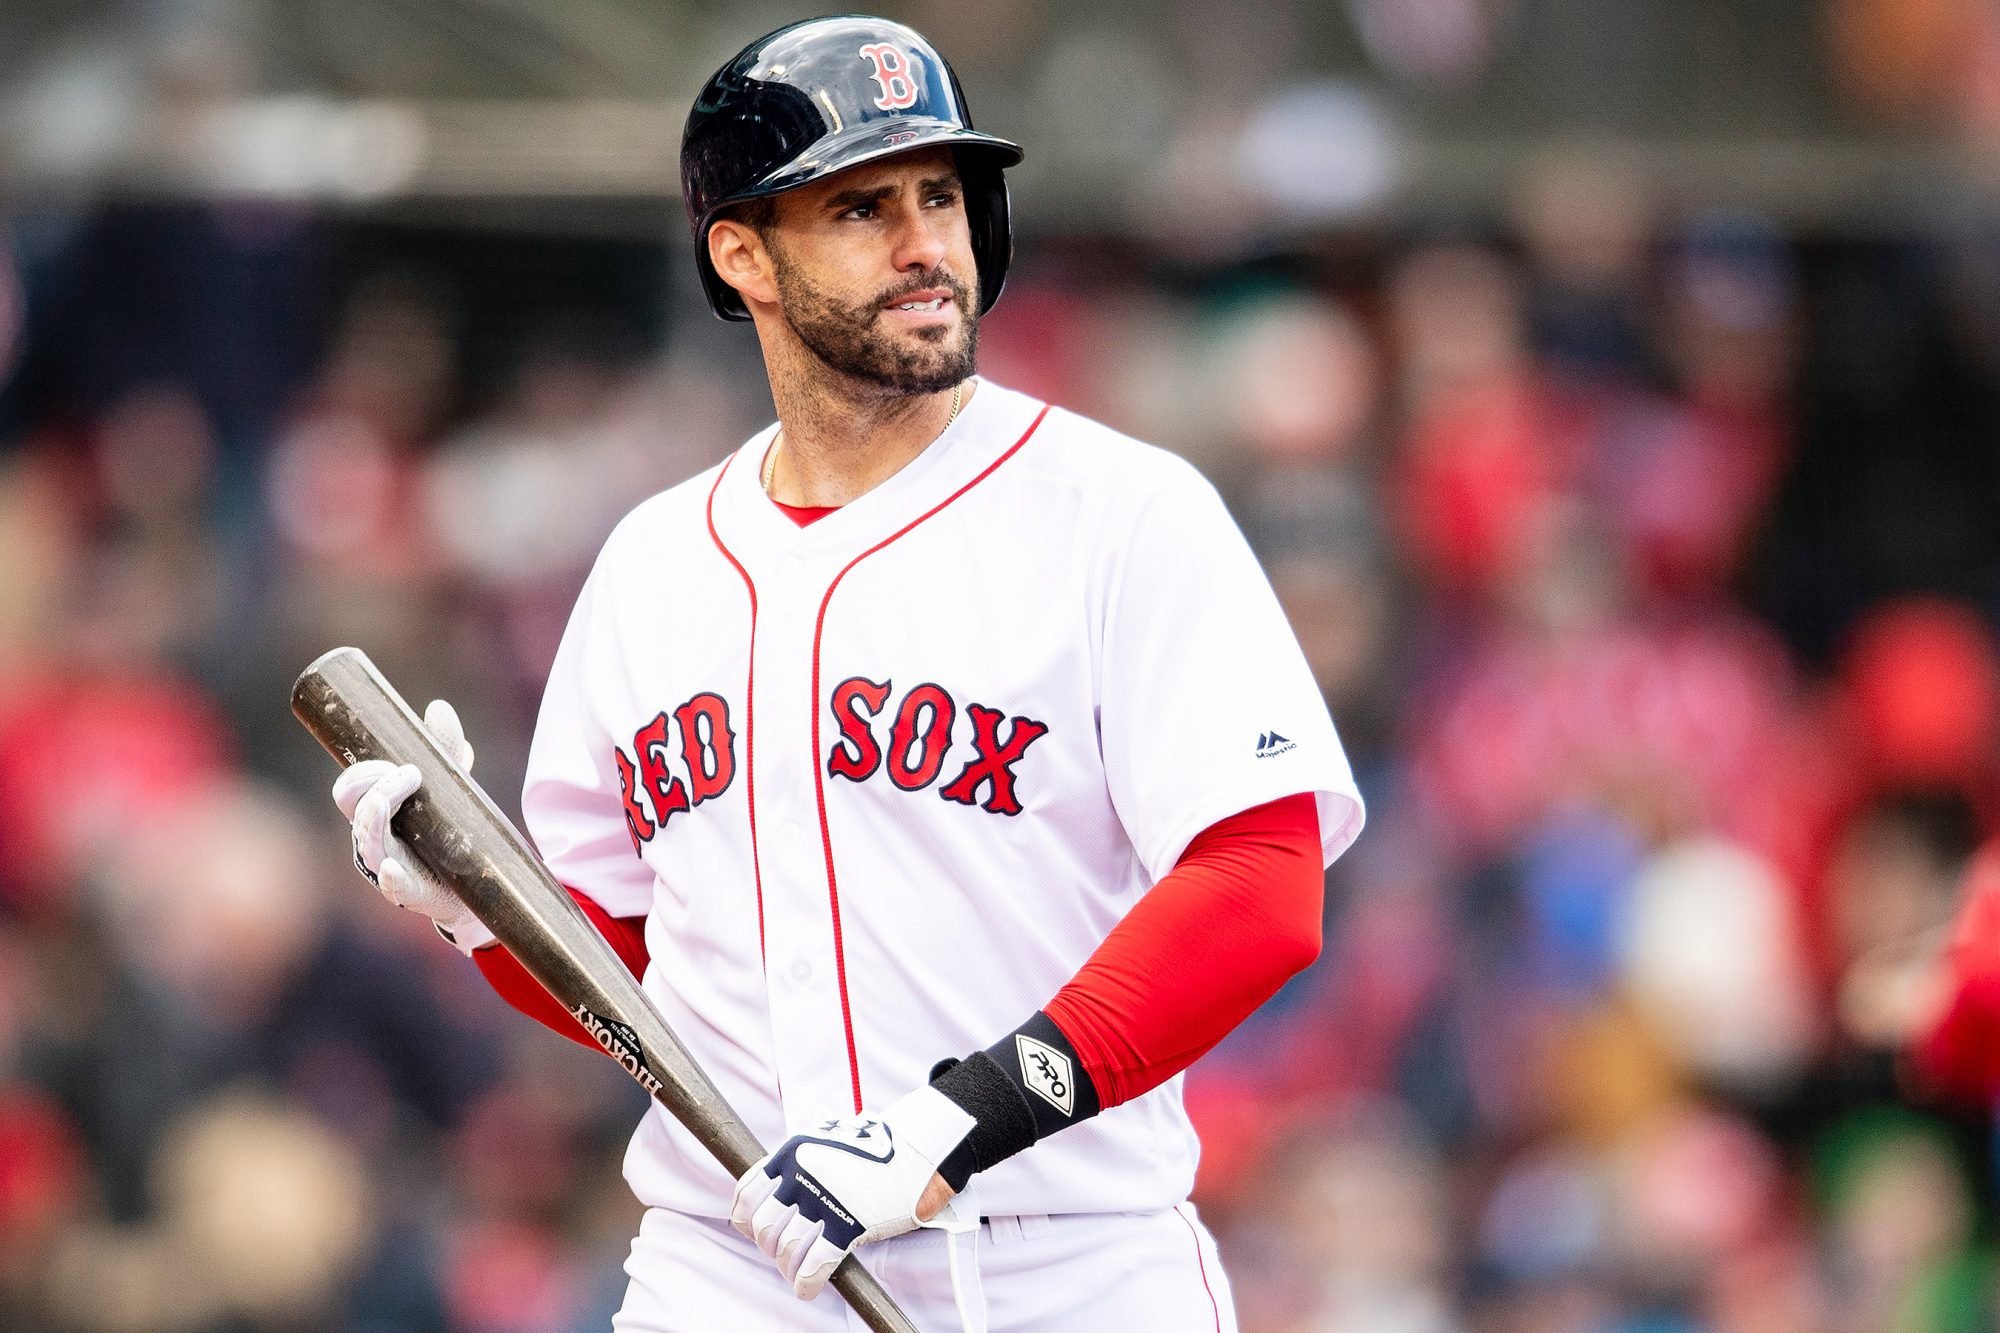 BOSTON RED SOX 2021 PREVIEW: ALTERNATIVE FANTASY MLB OUTLOOK